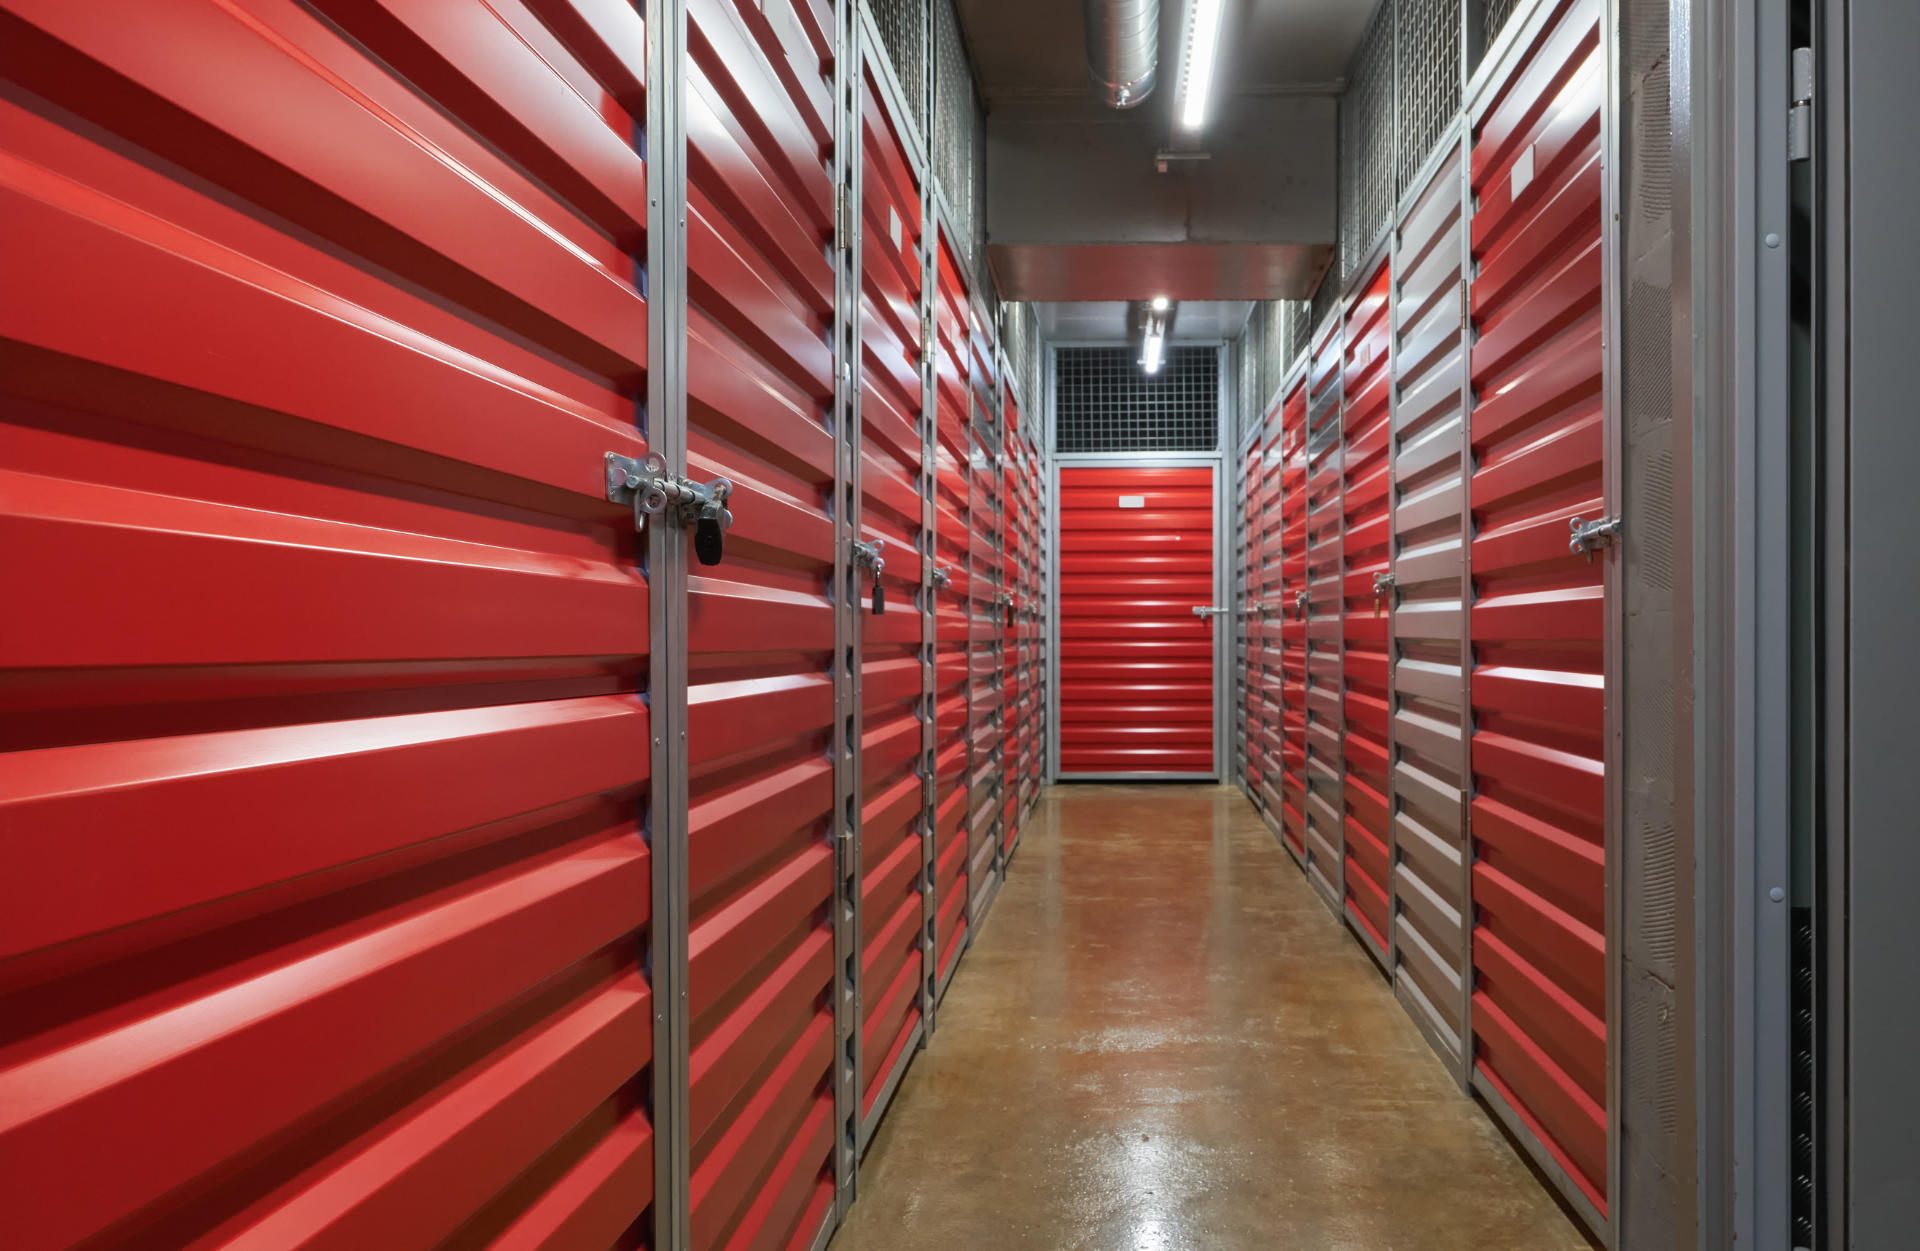 5 common reasons why people need self-storage